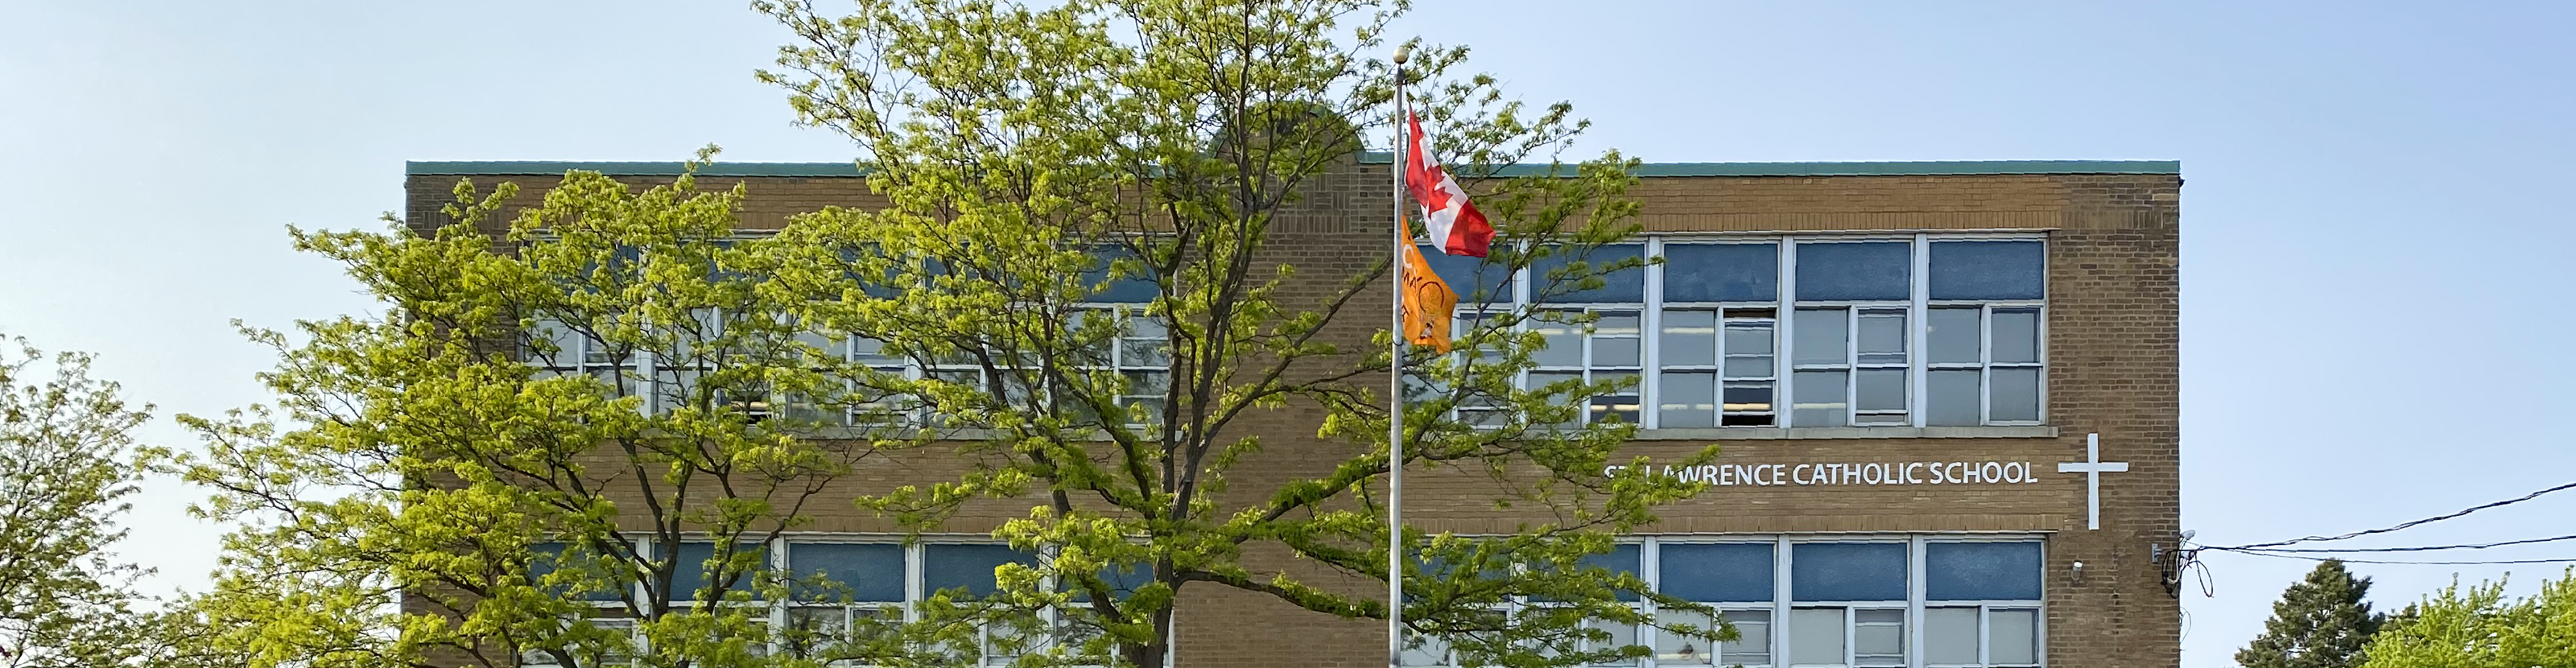 The front of the St. Lawrence Catholic School building.